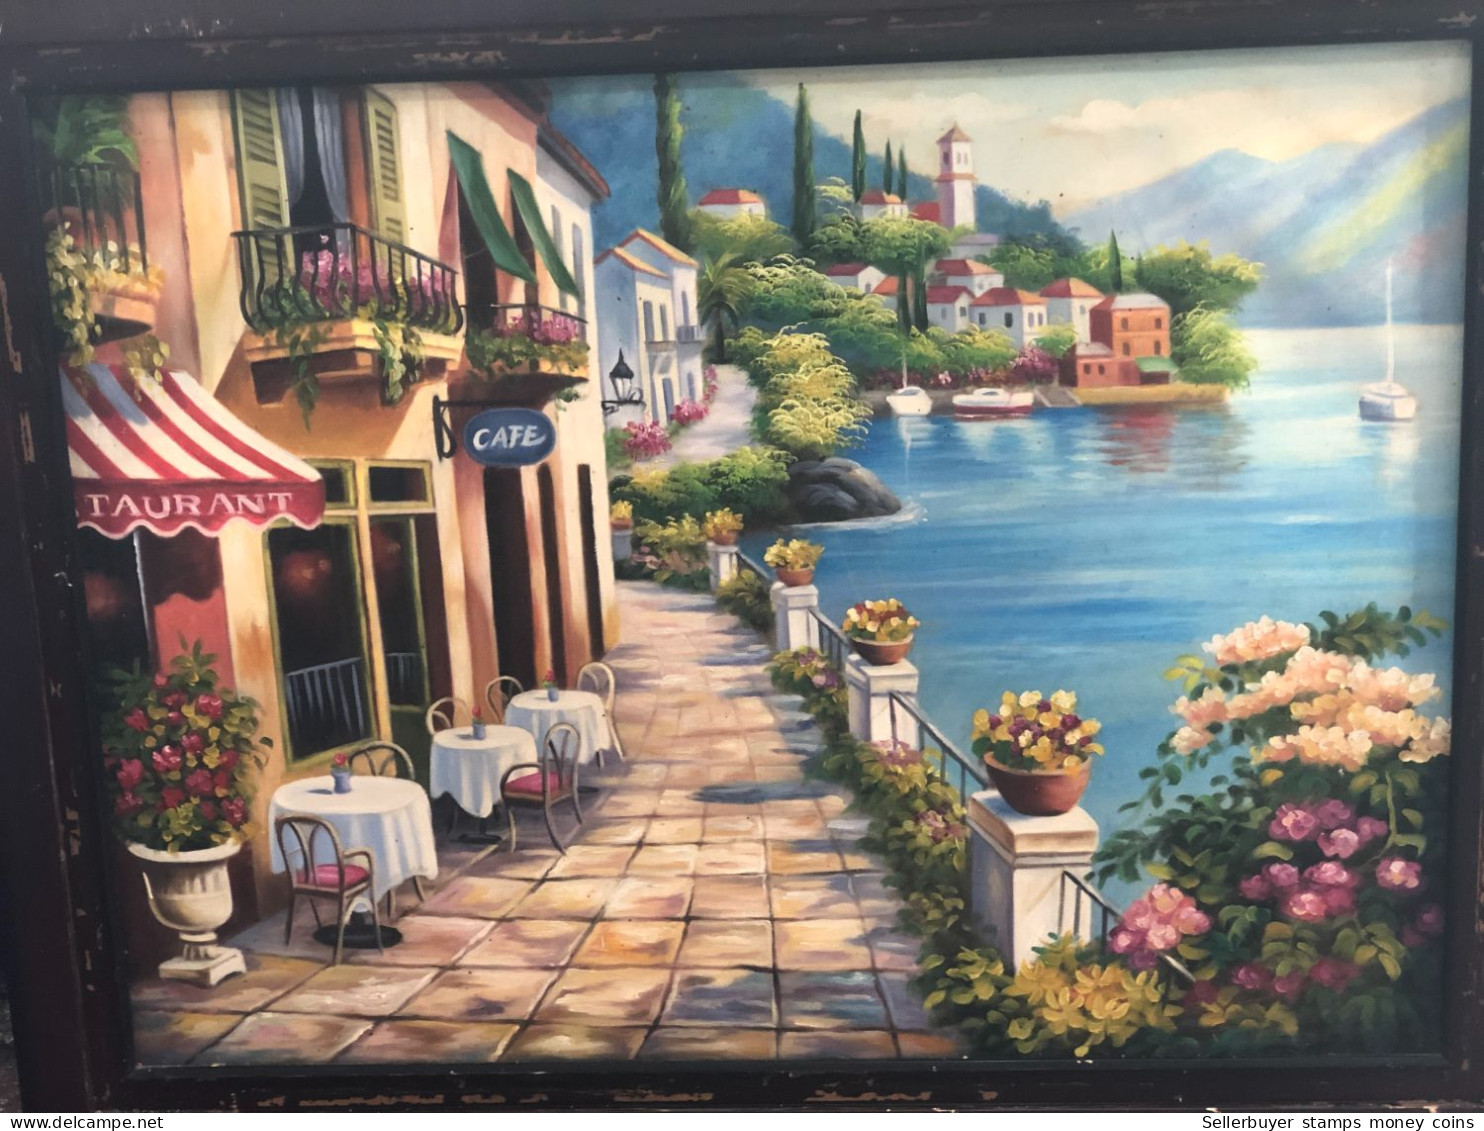 Viet Nam I Sell Picture-painting On The Strip Old 30 Years (draw A Cafe Taurant Size 59x78)one Picture - Asiatische Kunst